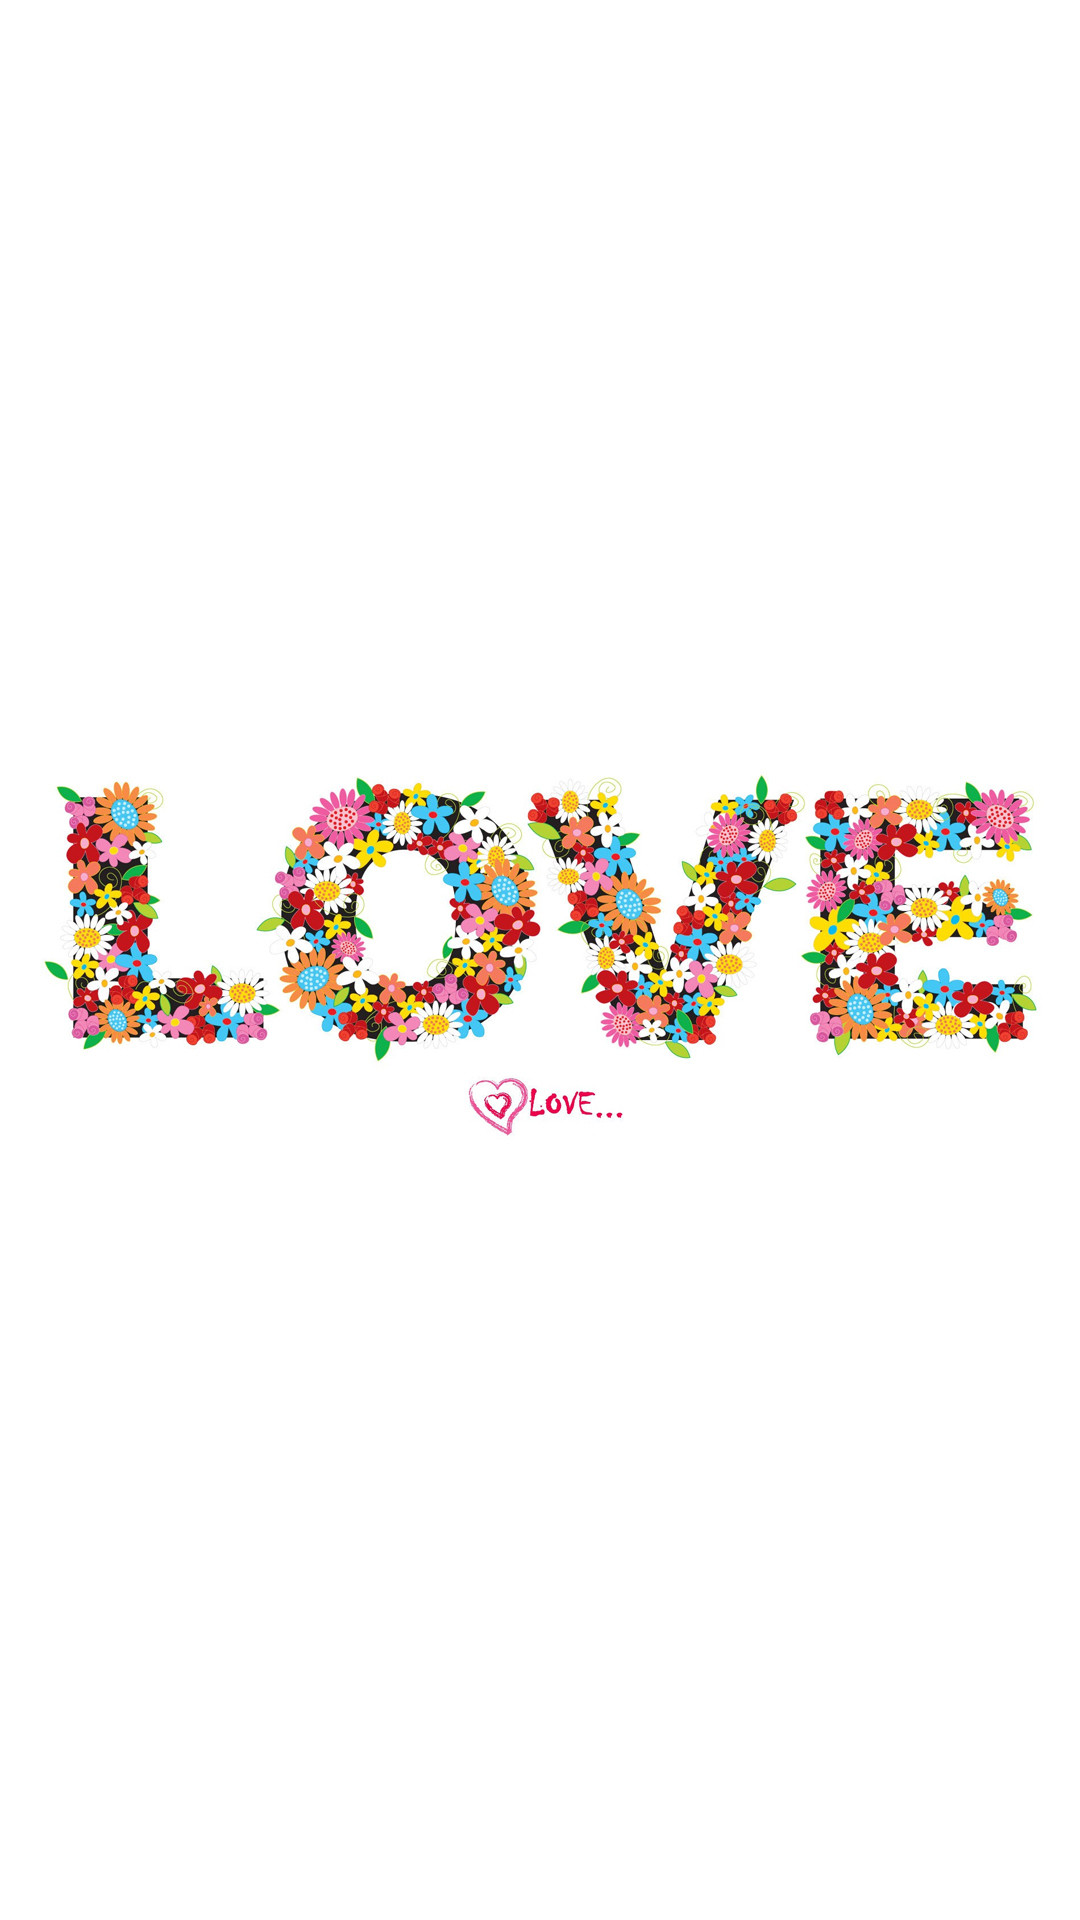 1080x1920 Love Floral Typography iPhone 6 Plus HD Wallpaper